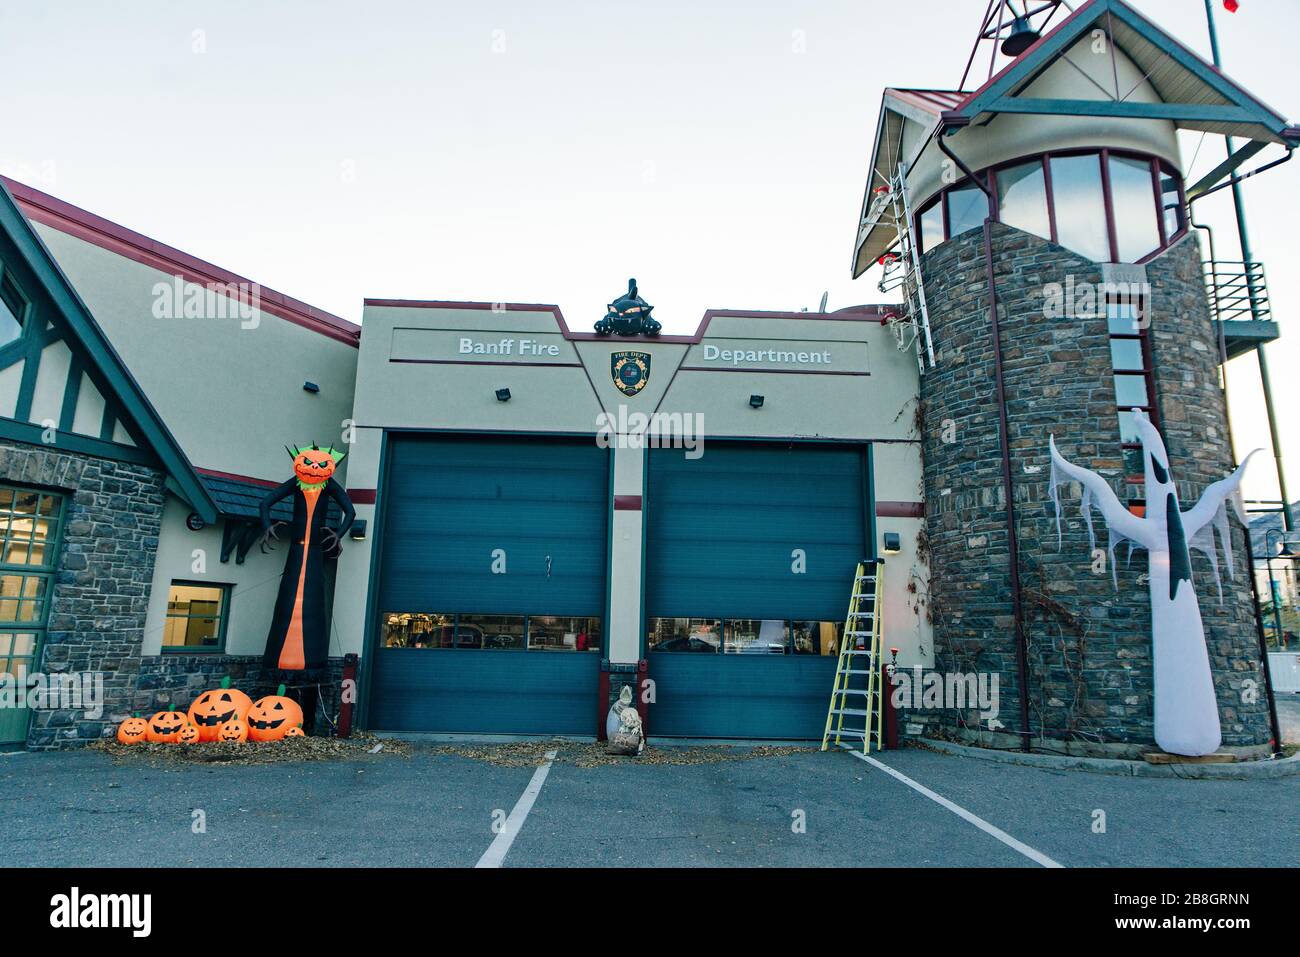 BANFF, AB, CANADA - JUNE 2018: Fire Department station building in Banff town centre. Stock Photo